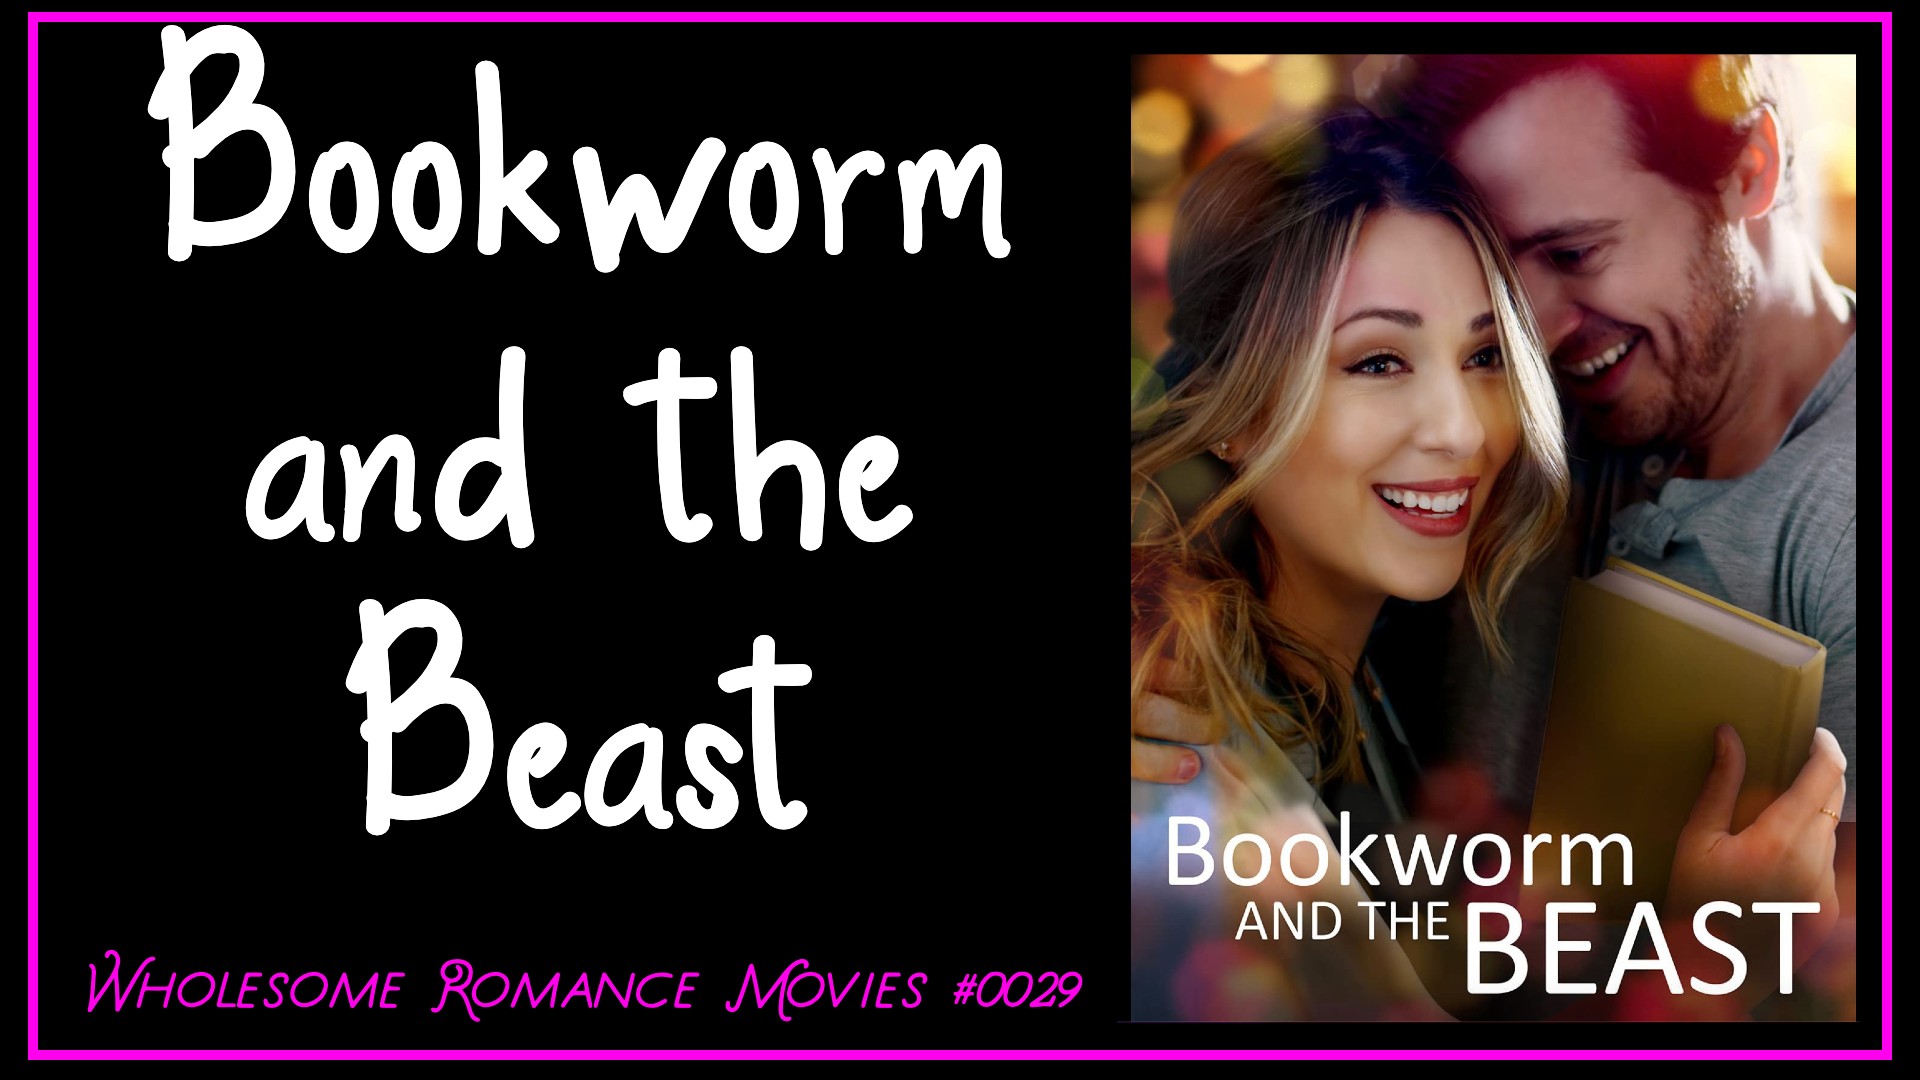 Bookworm and the Beast (2021) WRM Review